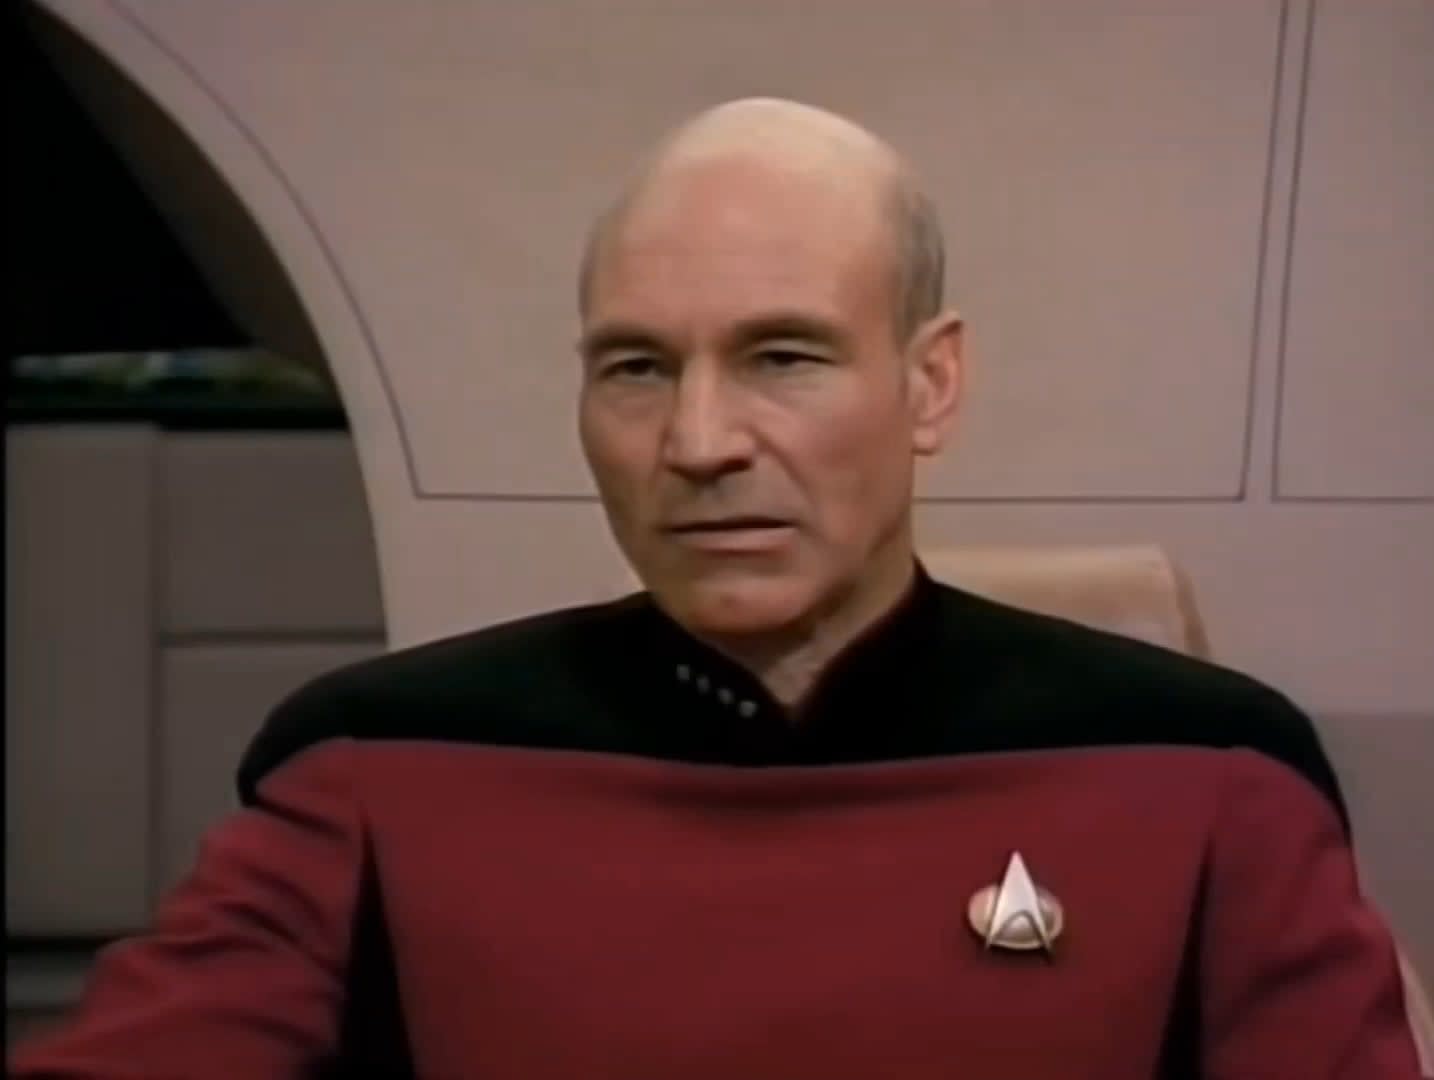 Patrick Stewart dancing and singing on the bridge of USS Enterprise-D. Originally filmed in 1991 as a birthday suprise for Gene Roddenberry, it wasn't meant for public viewing but a copy was made and later included as a DVD bonus.